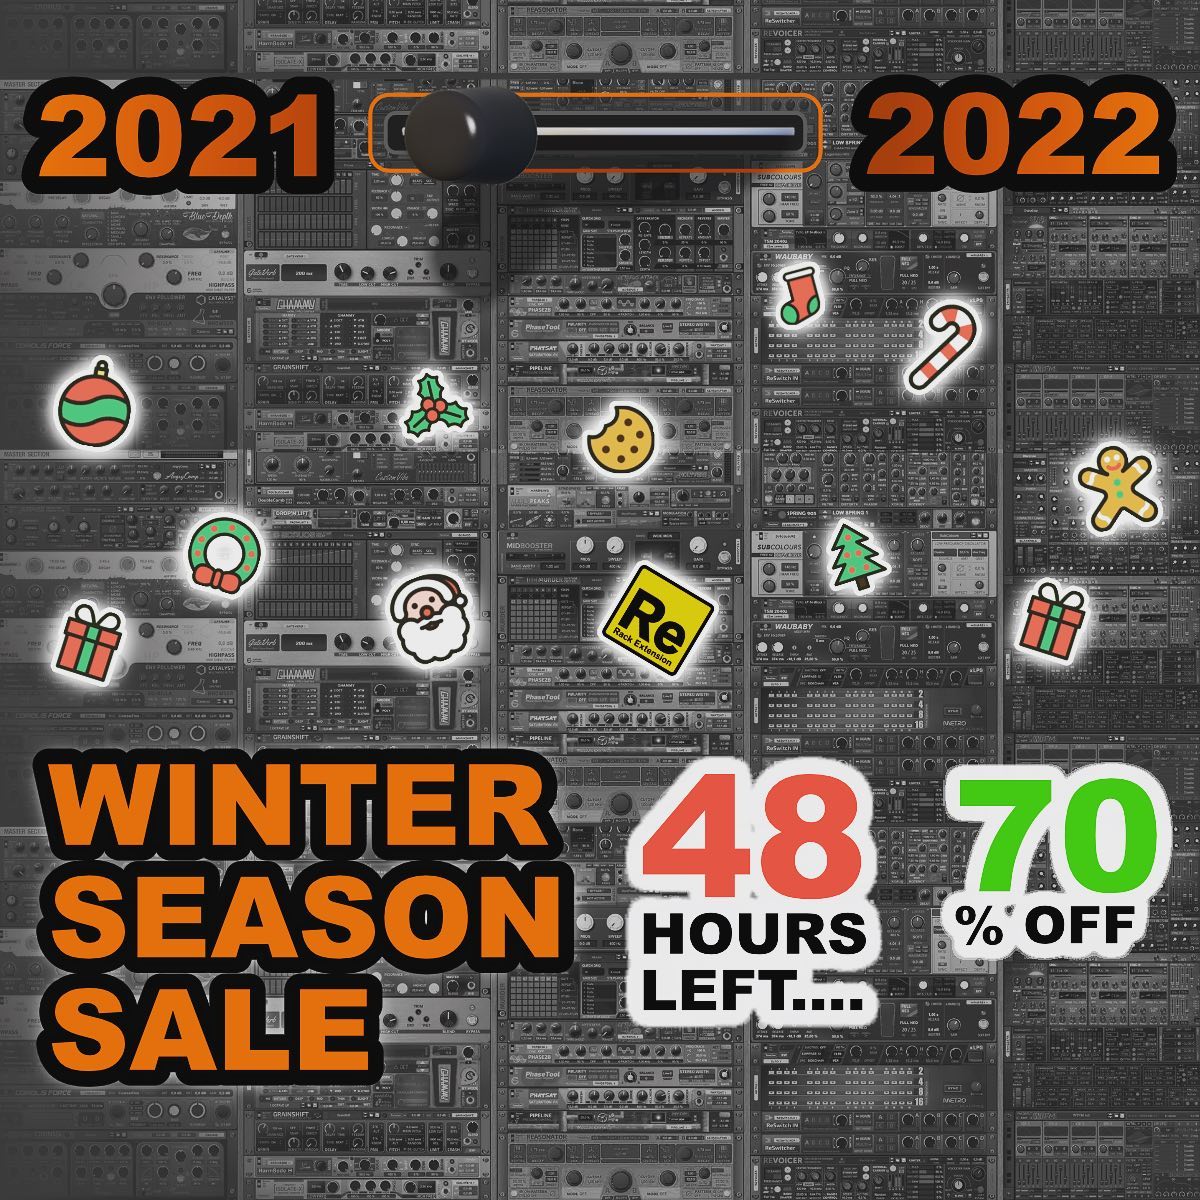 LAST 48 HOURS LEFT TO SAVE UP TO 70% OFF ON TURN2ON RE

Turn2on Software make biggest sale up to 31 December 2021. Save right now! 
Last chances to have Rack Extension from Turn2on with sweety discounts?
Not, at last 48 hours! 
WIN RACK EXTENSION ENETERING TO TURN2ON GIVEAWAYS

Giveaway Rack Extensions? YES!!! Get a chance at these XMAS days to win RackExtensions from Turn2on Software.
You still have chances to win at December 30 and 31 - rack extension.
Just go to our website of social media pages, and entering to the Giveaways:

- 29 December (GIVEAWAY #7)
- 30 December (GIVEAWAY #8)
- 31 December (GIVEAWAY #9)

More entering points, more chances to win!
Every day 2 winners get Rack Extension licenses #reason #reasonrack #reasonstudios #rackextension #rackextensions #turn2on #giveaway #win #license #xmas #newyear